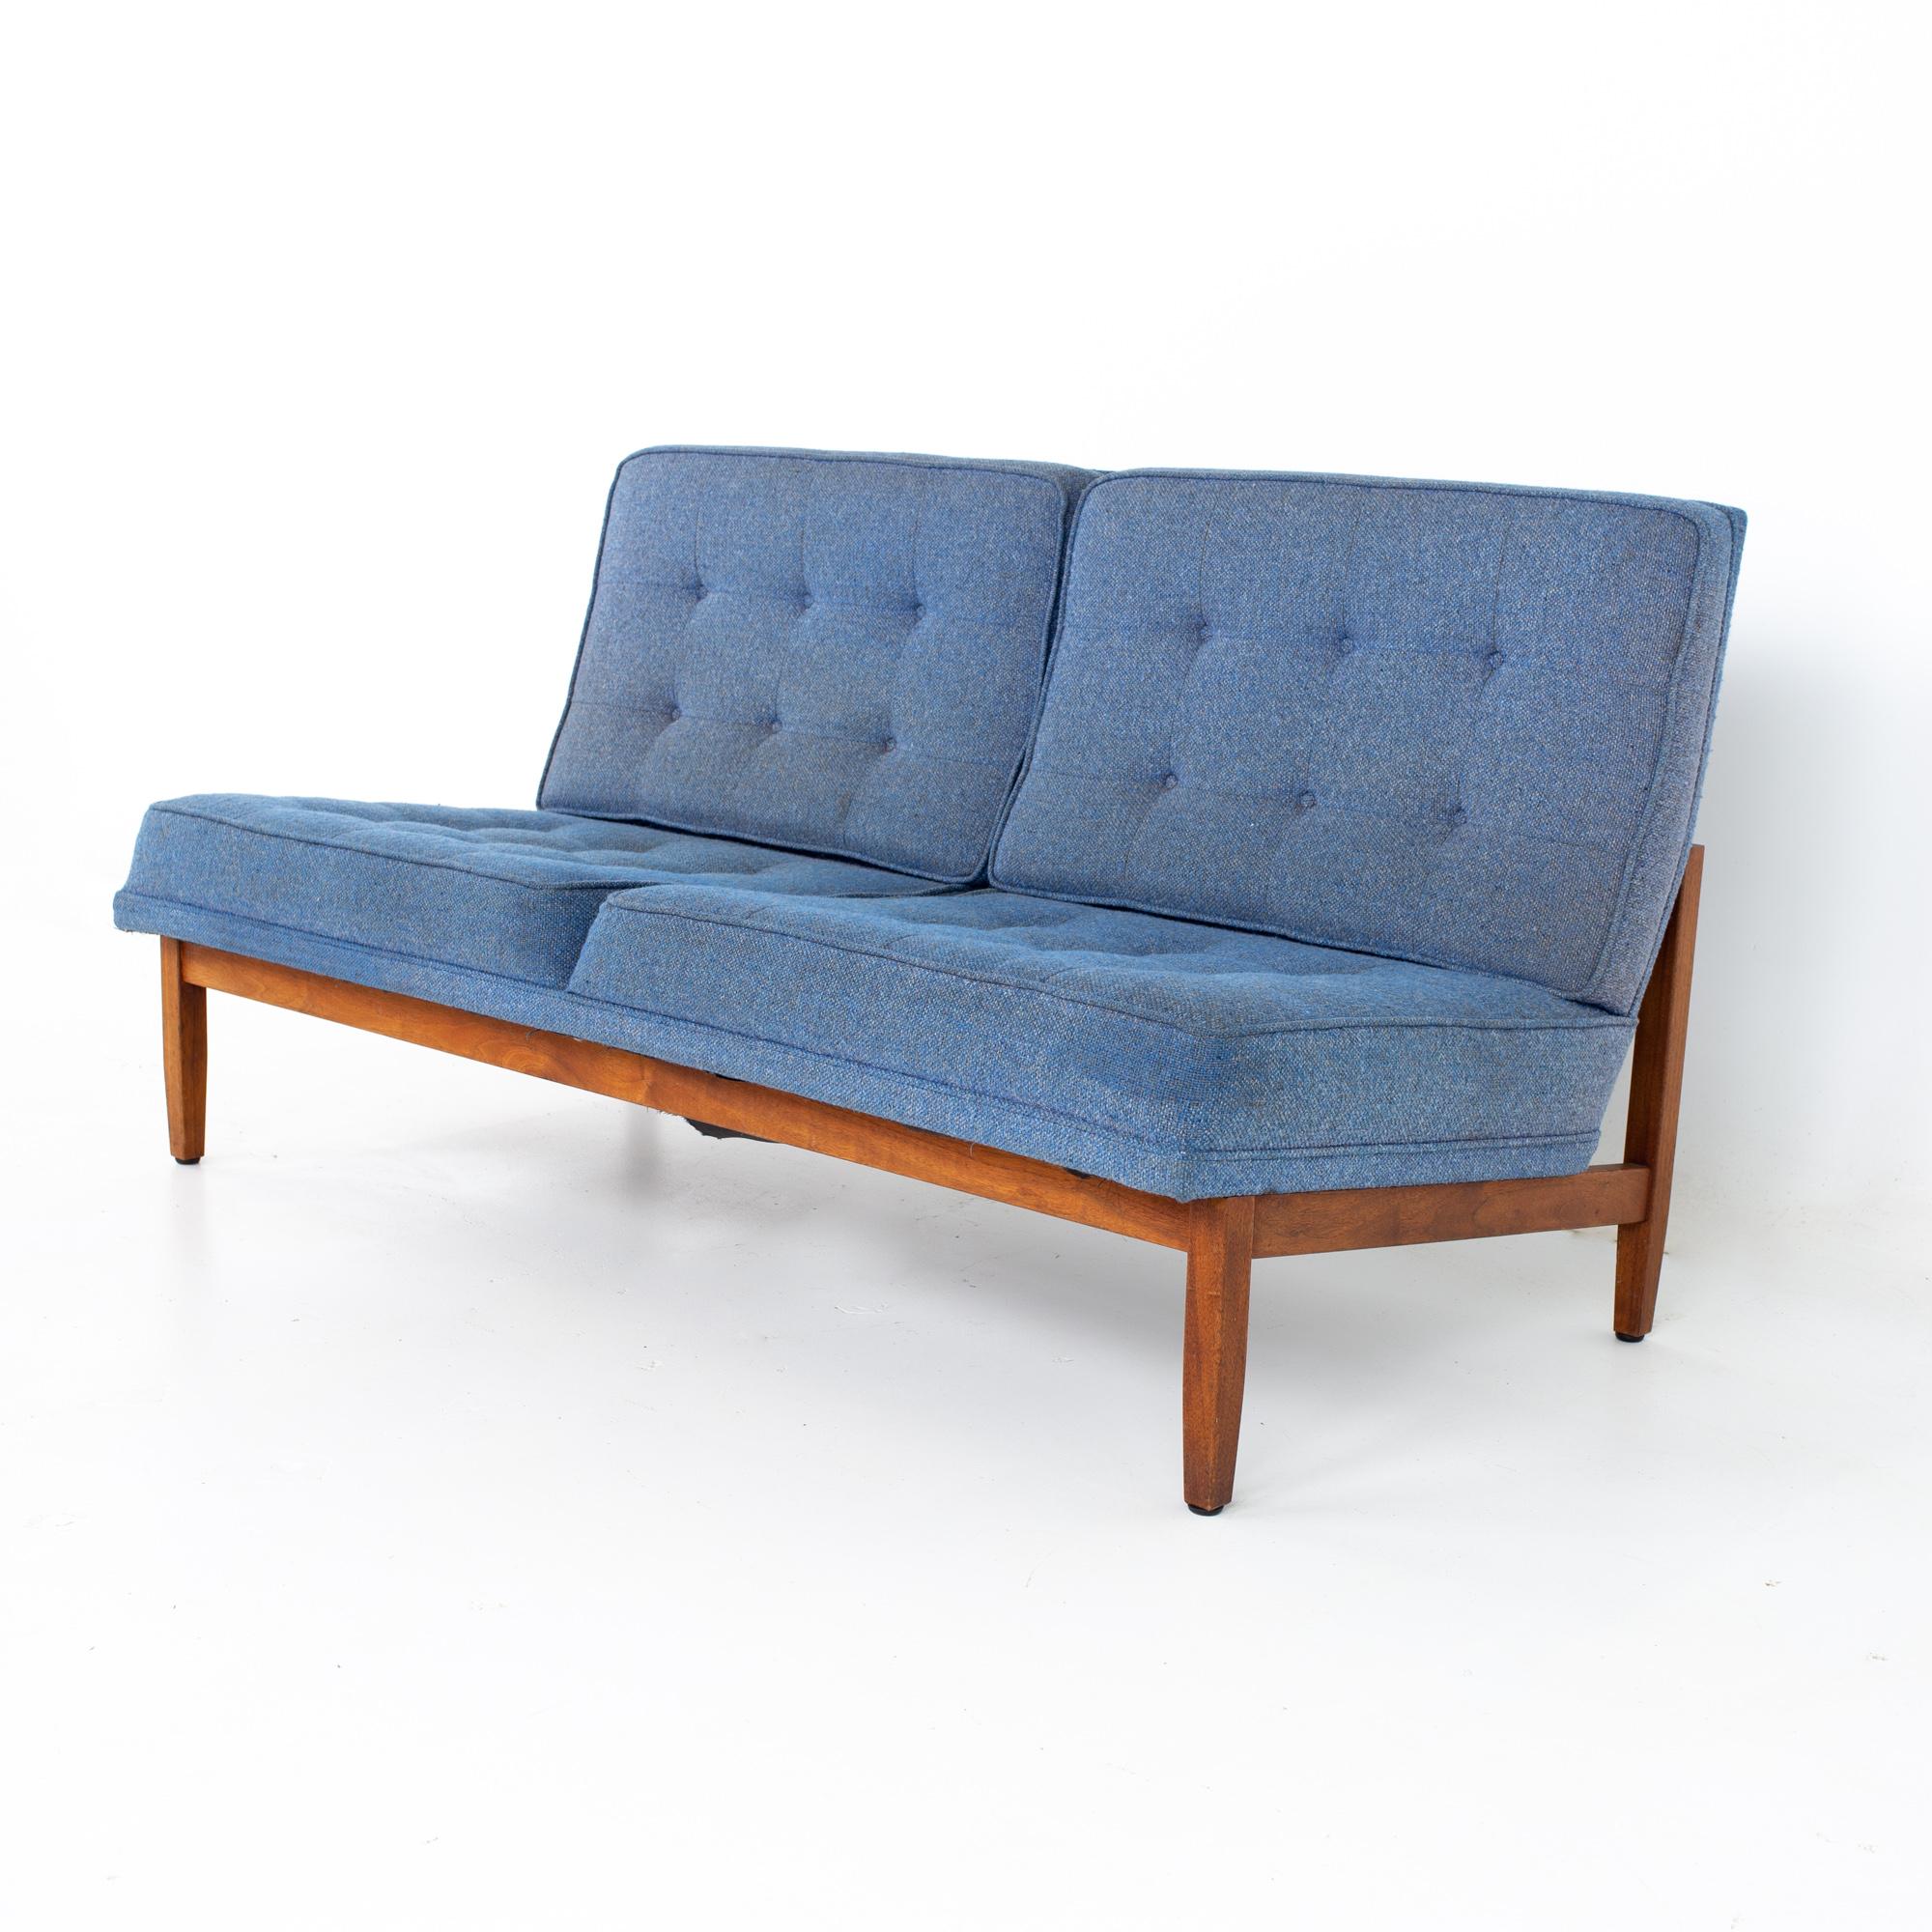 Early Florence knoll mid century parallel bar walnut blue settee love seat sofa.
Sofa measures: 56 wide x 29 deep x 29.75 high, with a seat height of 15 inches

All pieces of furniture can be had in what we call restored vintage condition. That